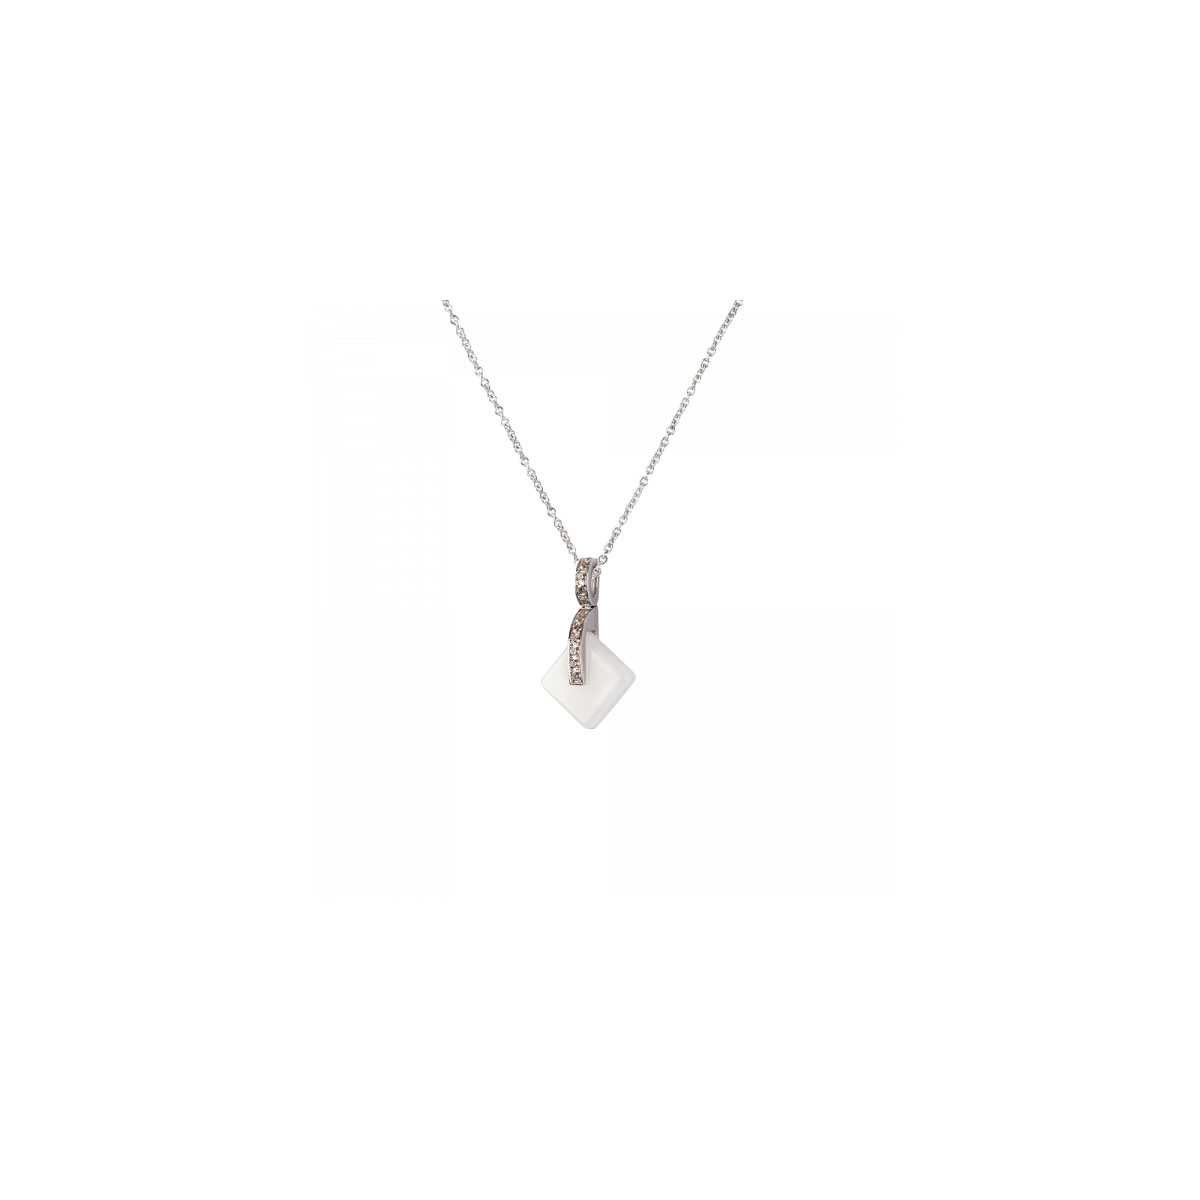 Daum Eclipse Crystal Simple Pendant Necklace in White